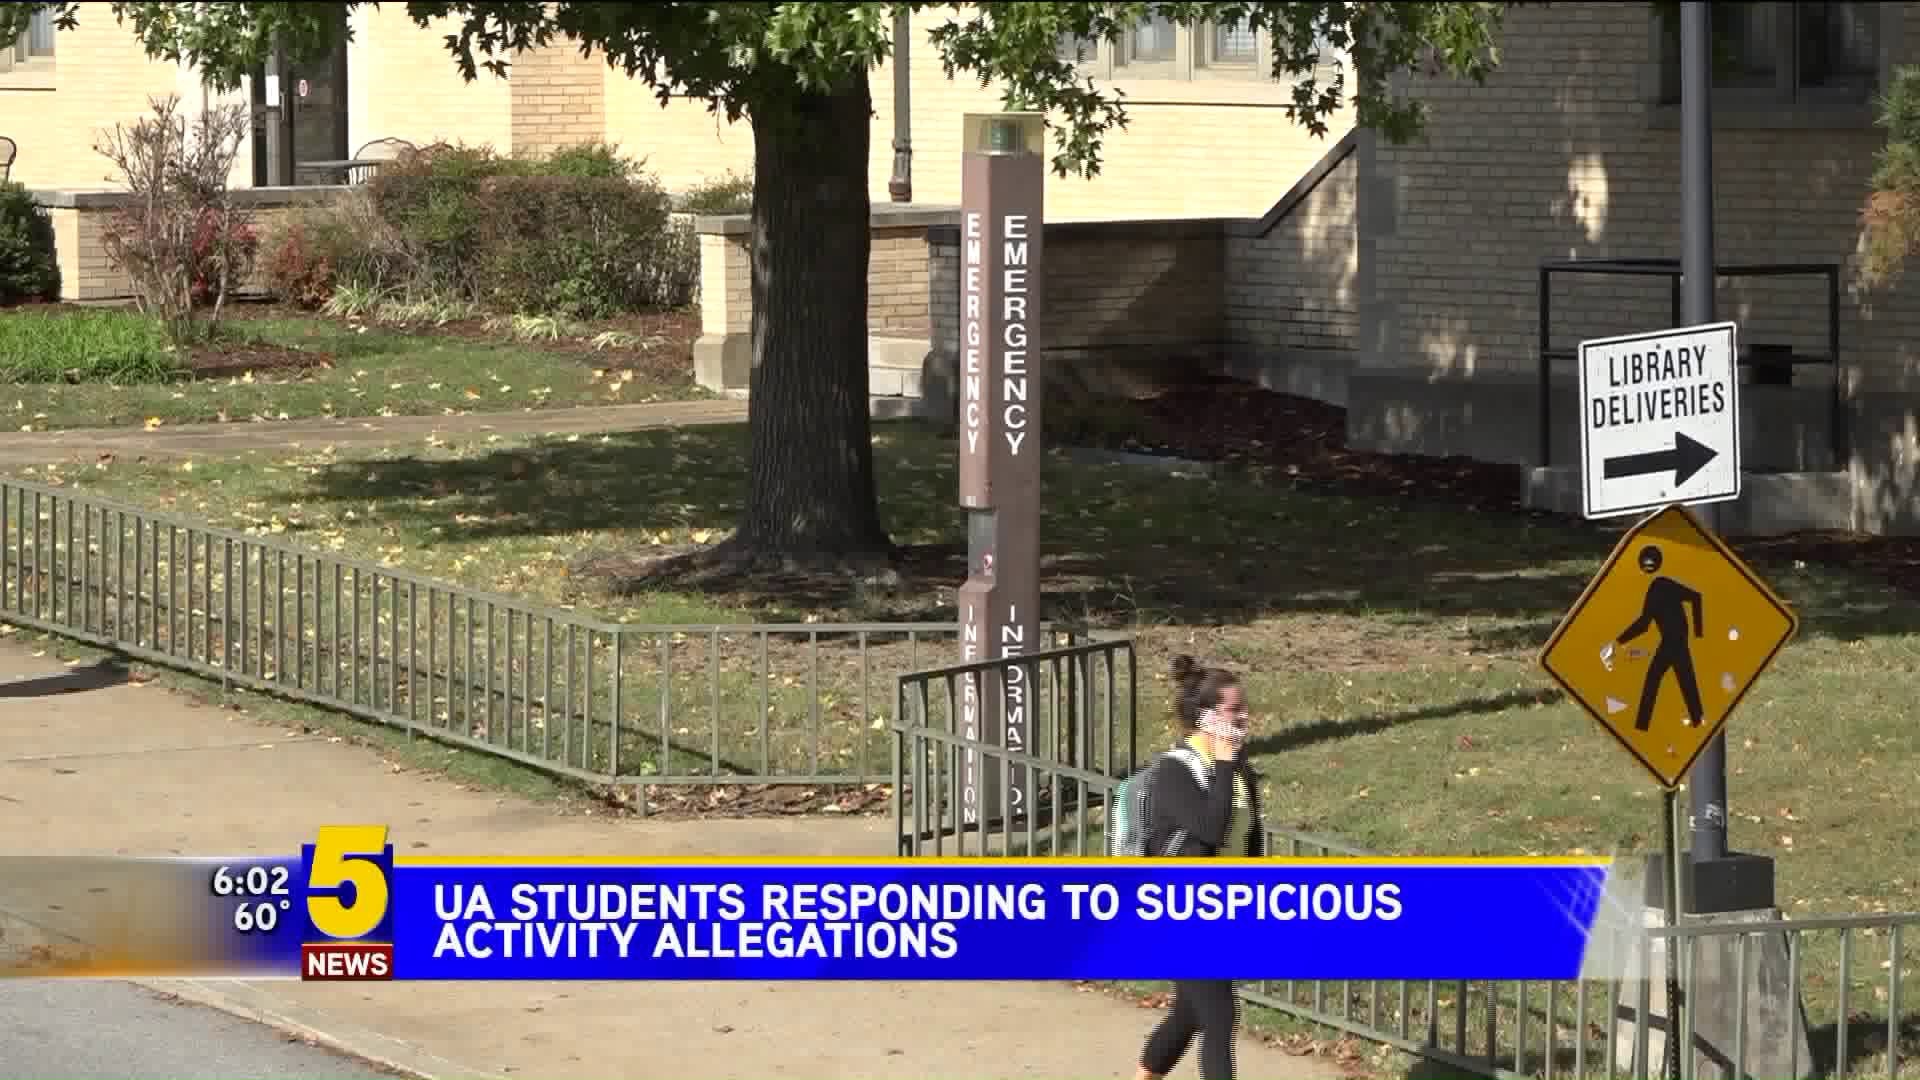 UA Students Responding To Suspicious Activity Allegations